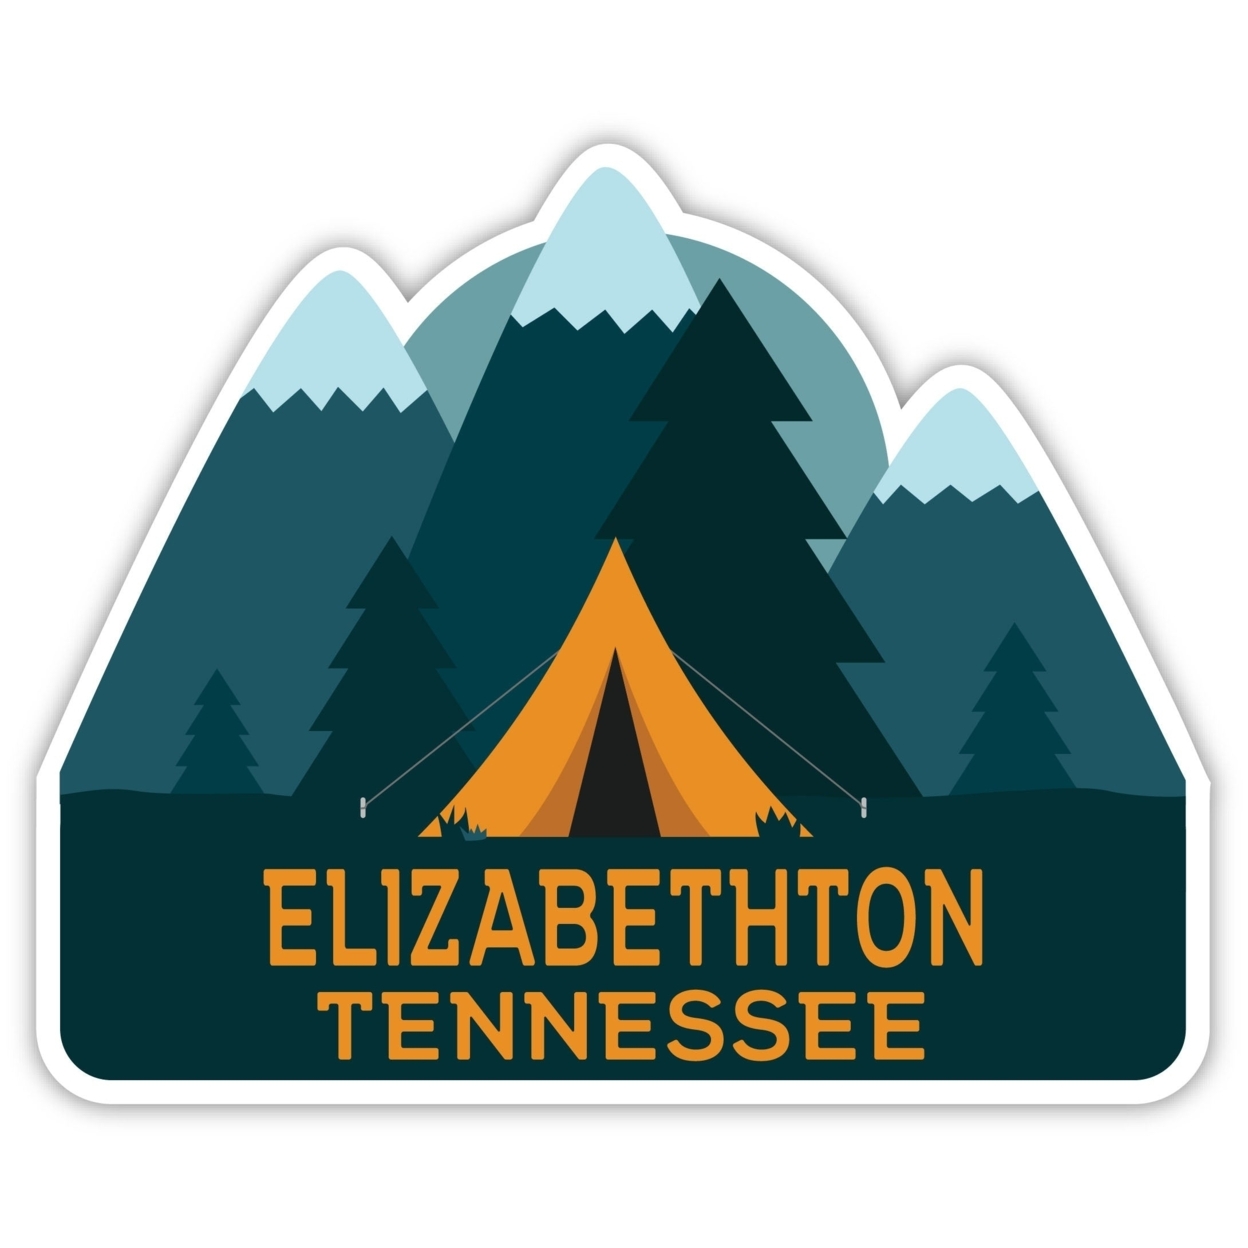 Elizabethton Tennessee Souvenir Decorative Stickers (Choose Theme And Size) - 4-Pack, 6-Inch, Bear